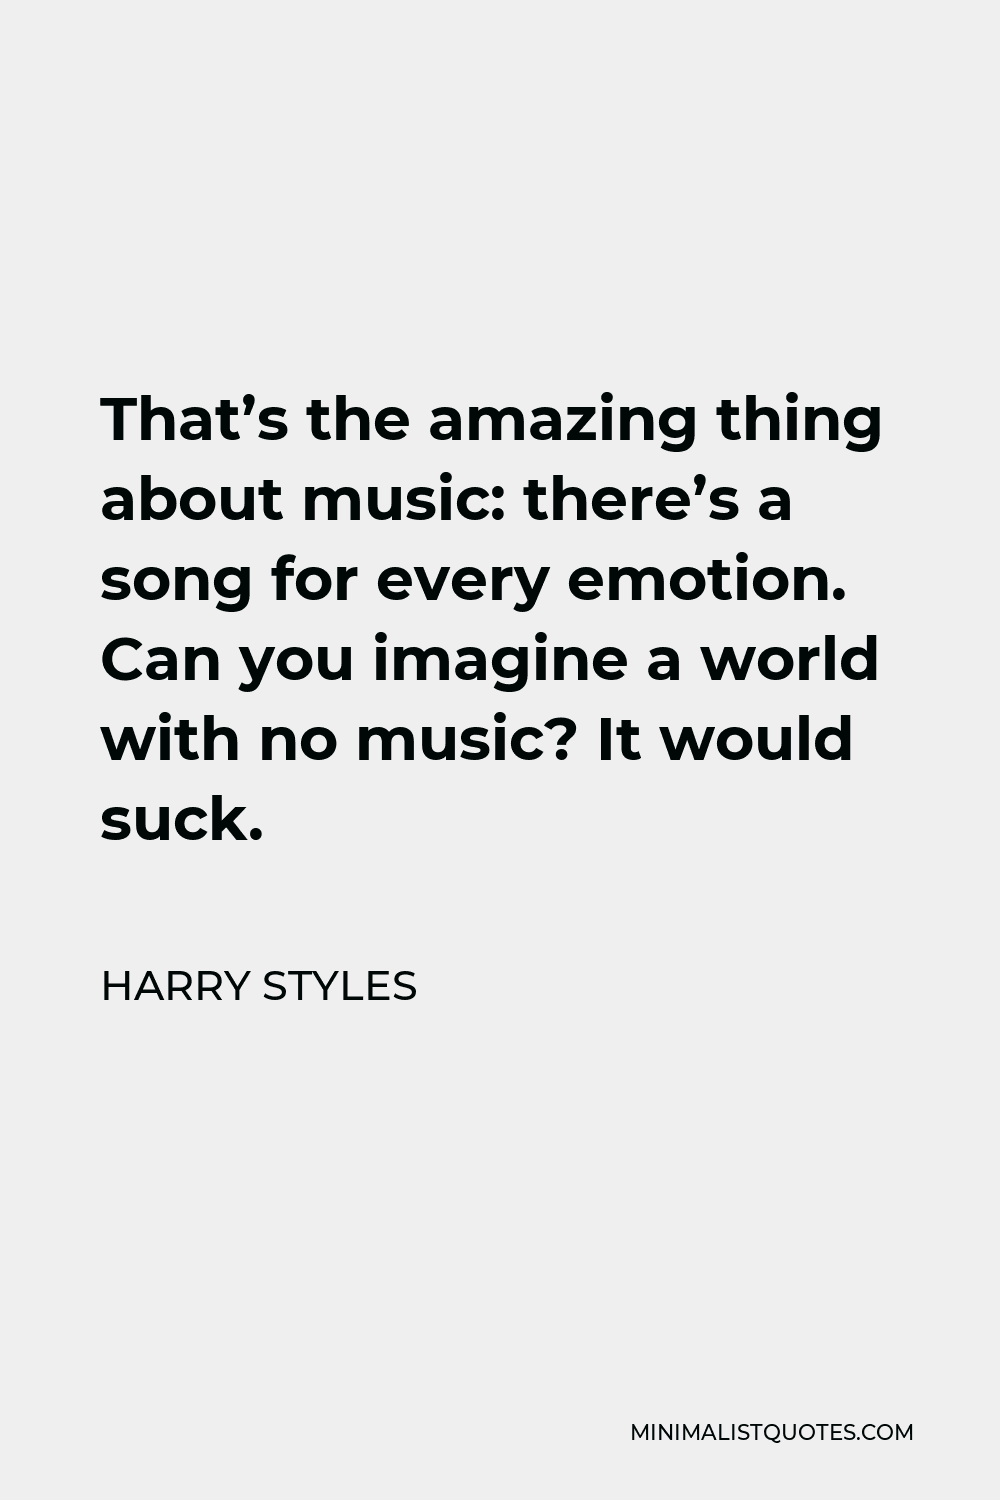 Harry Styles Quote - That’s the amazing thing about music: there’s a song for every emotion. Can you imagine a world with no music? It would suck.